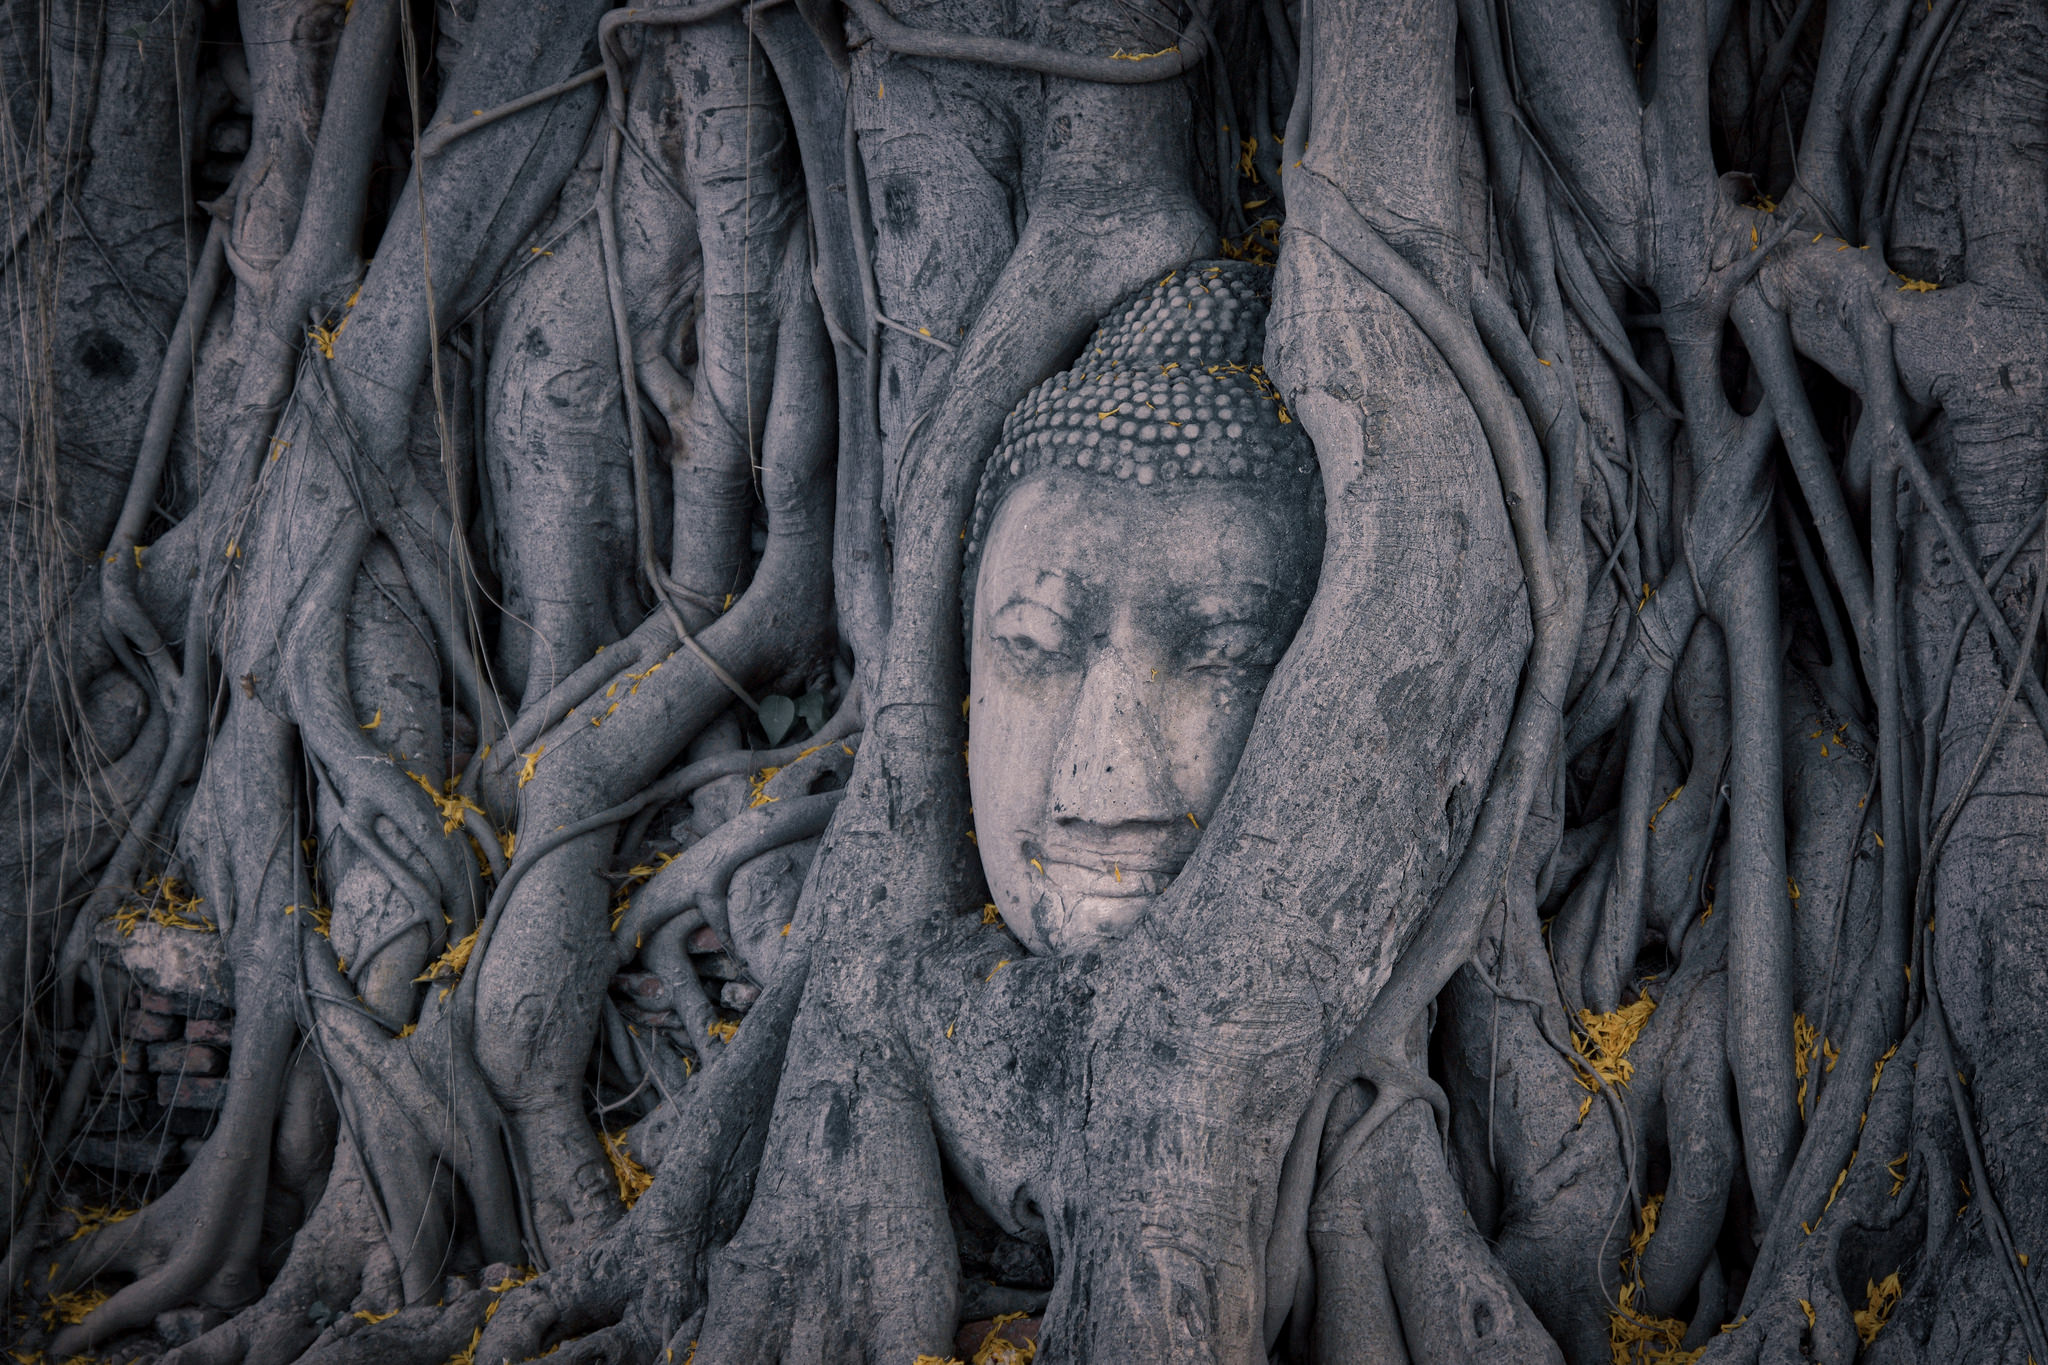 A buddha face engulfed by grey tree roots